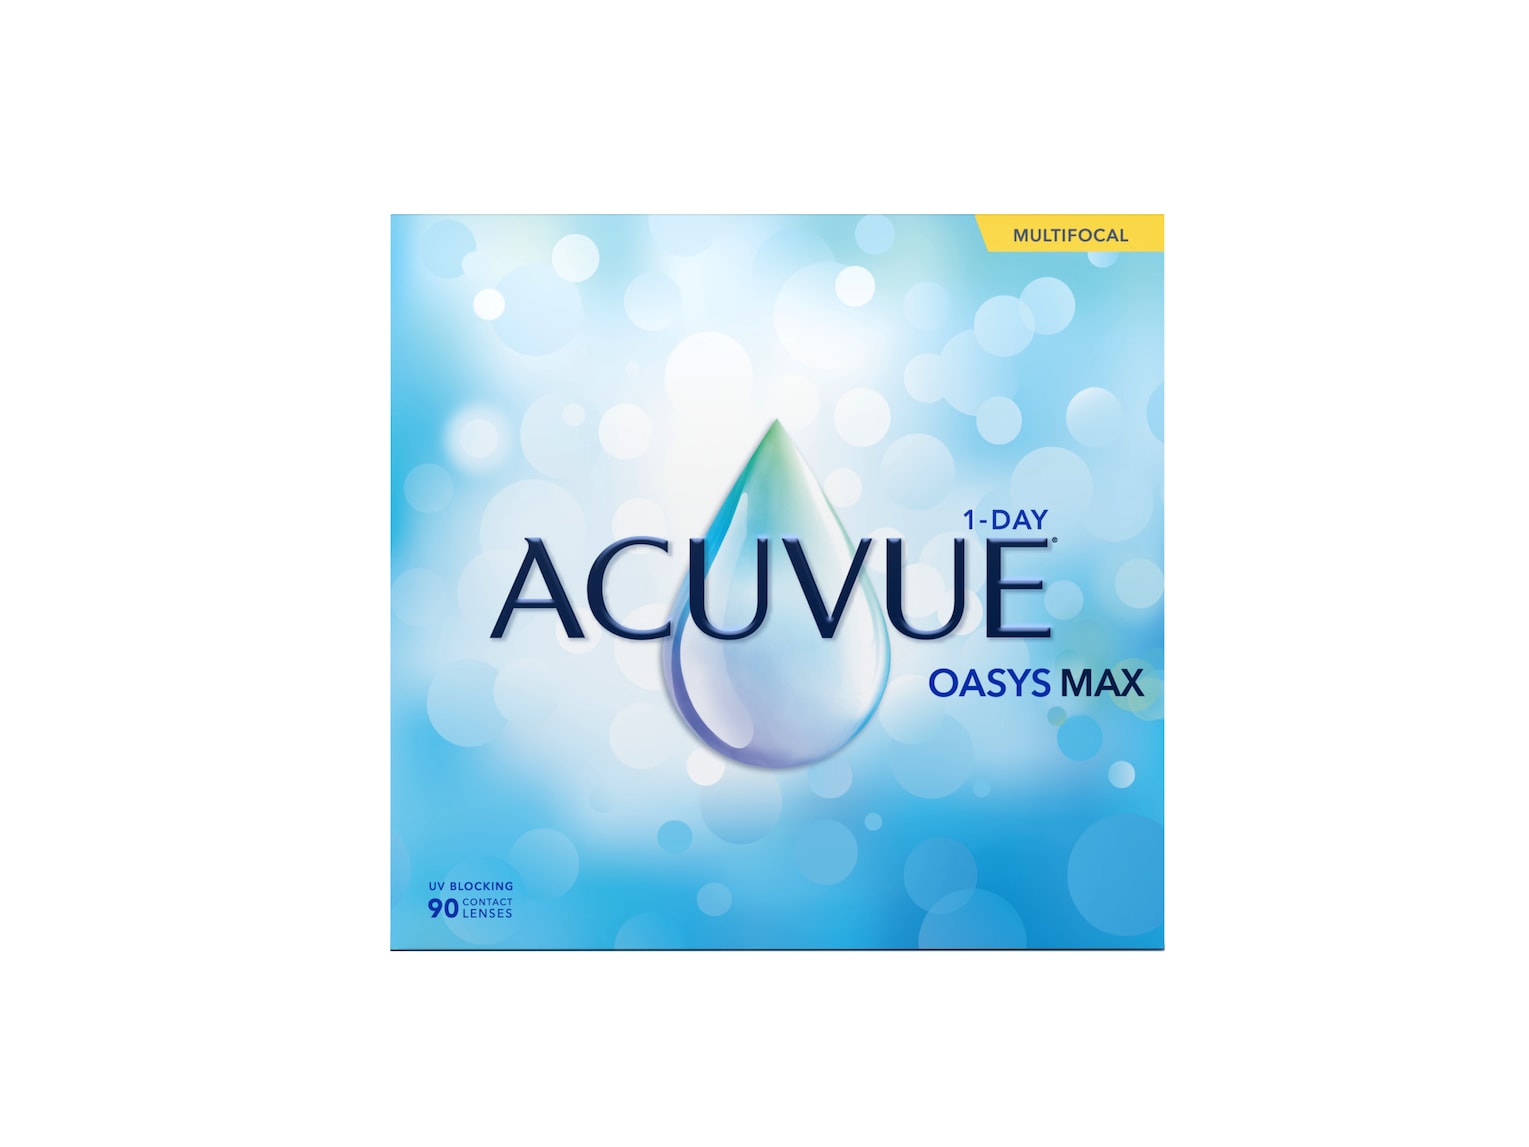 Acuvue Oasys 1-Day Max MULTI